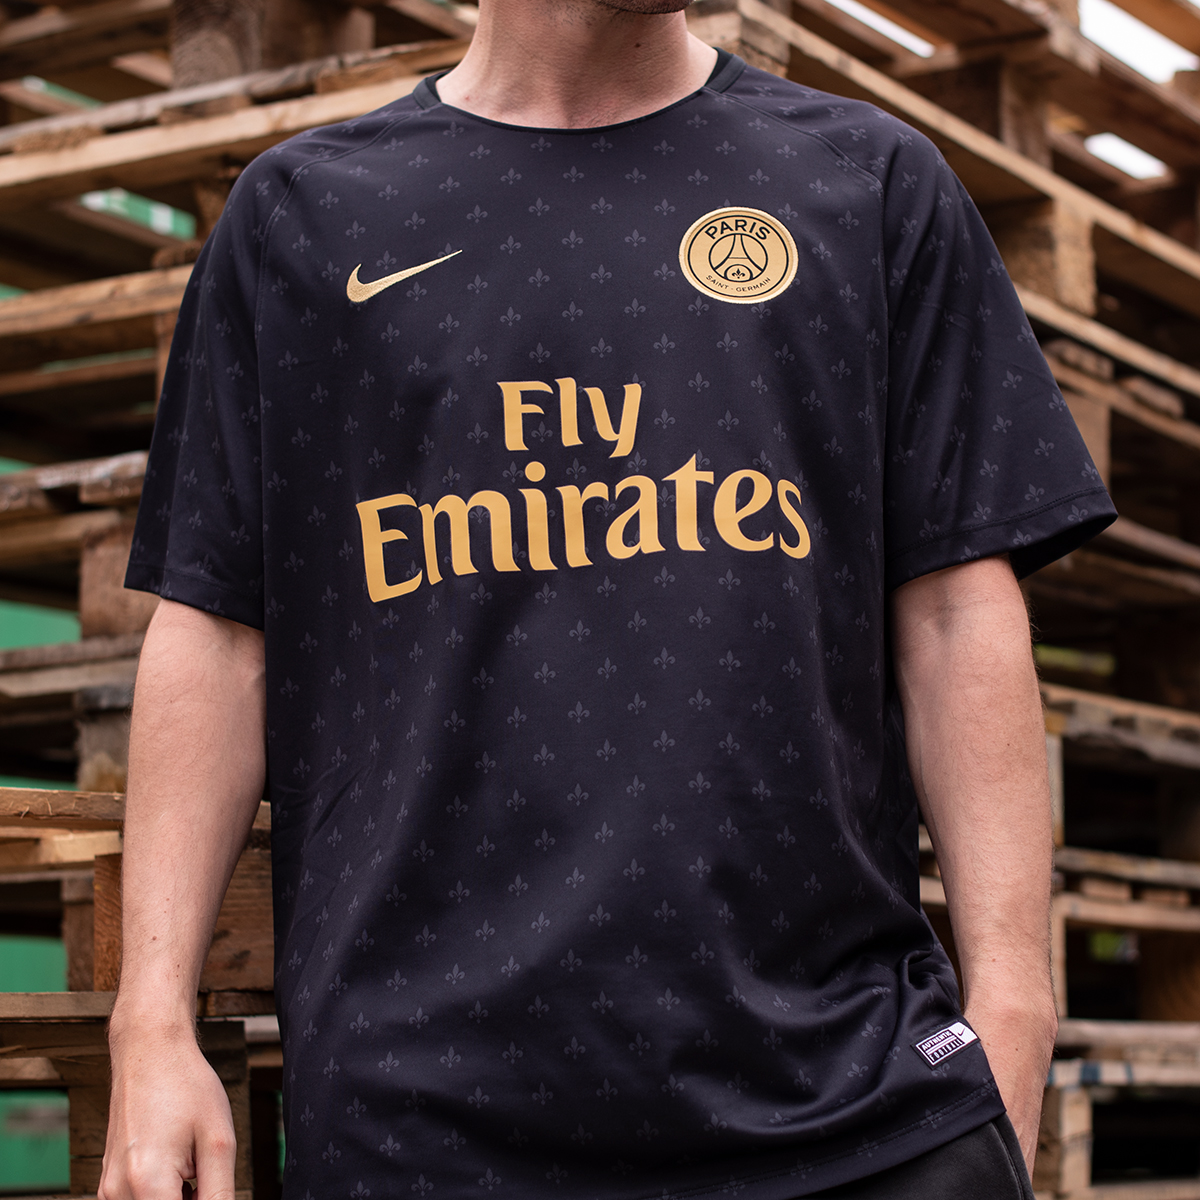 Classic Football Shirts on Twitter: "PSG 2018 Training Top by Nike 🇫🇷  Hitting the site on May 11th! https://t.co/ST9qCA7oF2" / Twitter